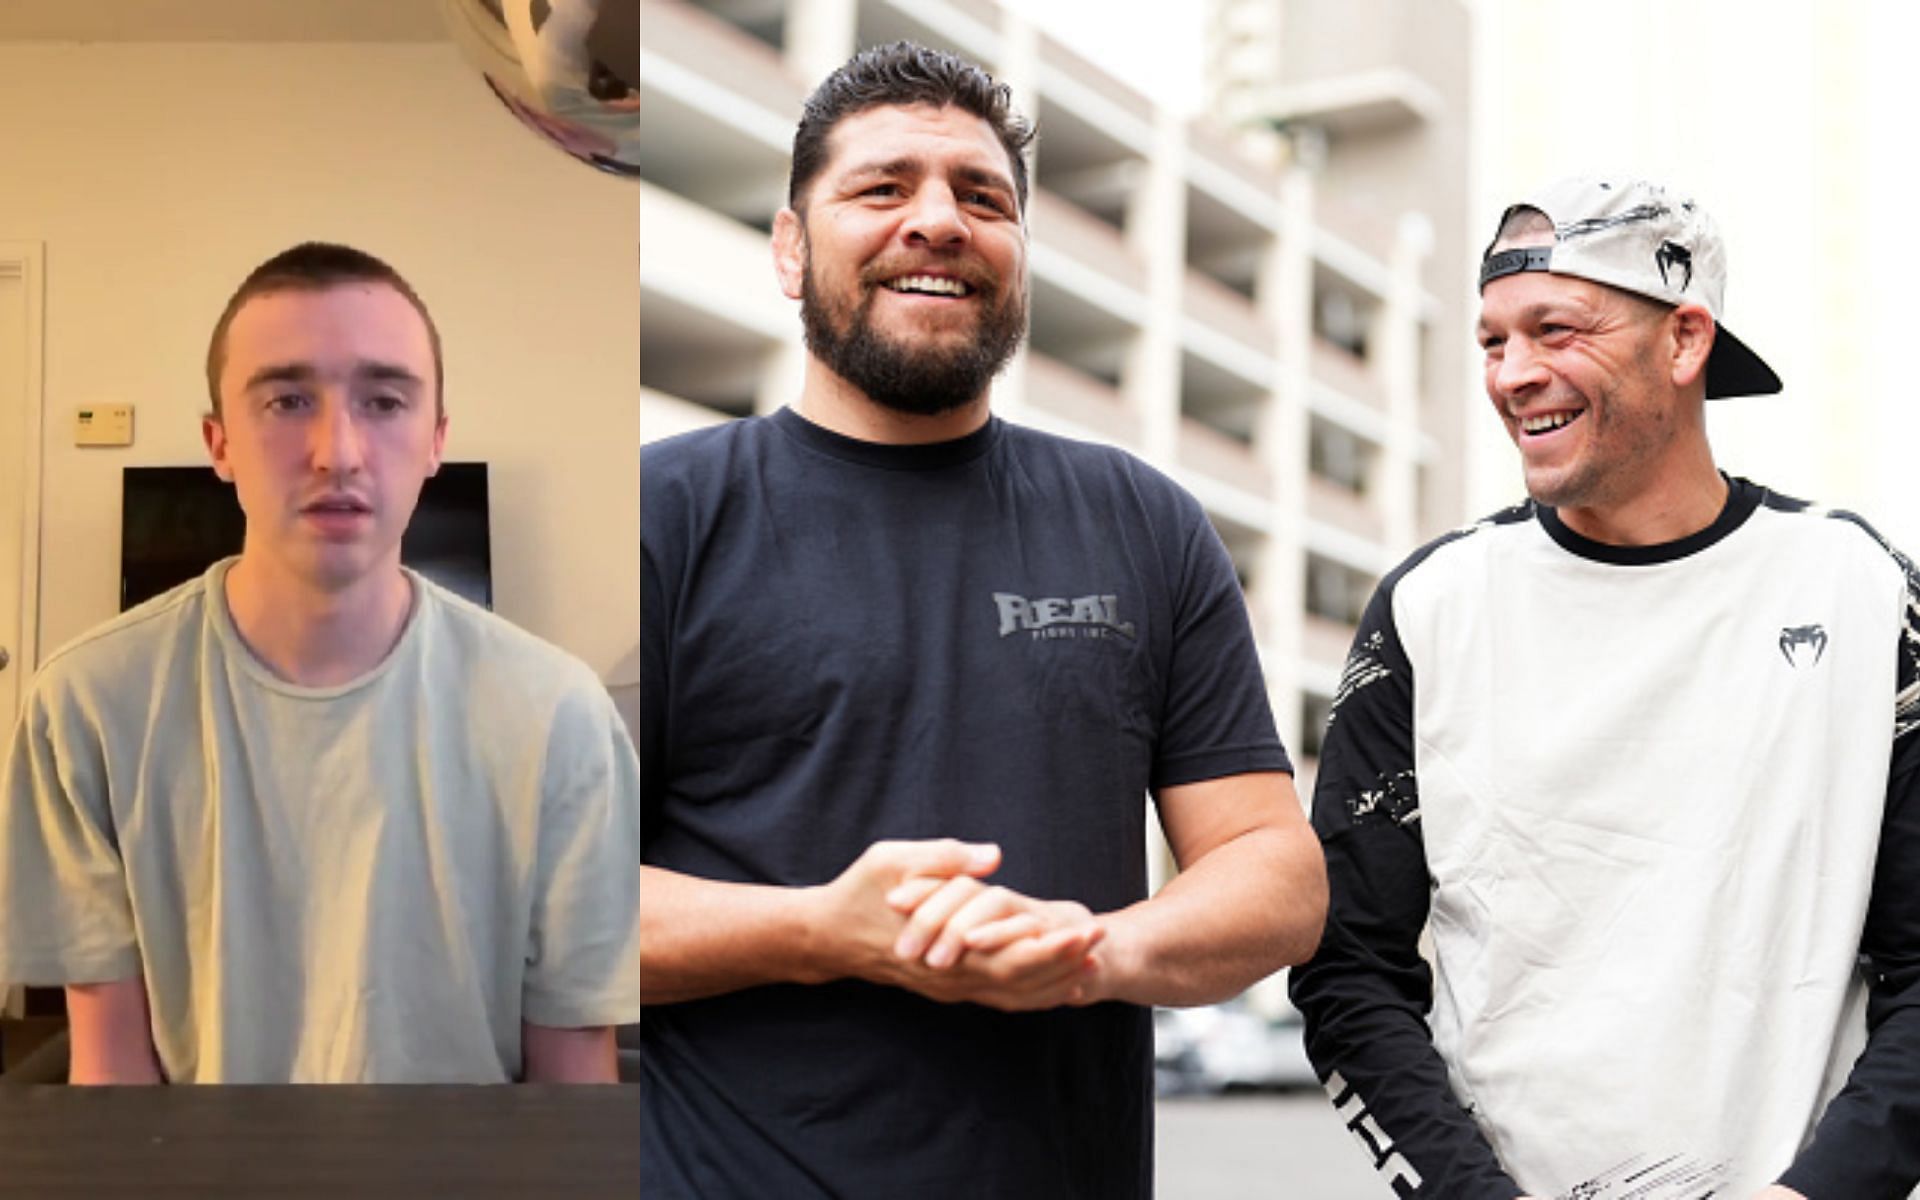 Derek from Betr (Image credit: @betr on Twitter), Nick and Nate Diaz (right)